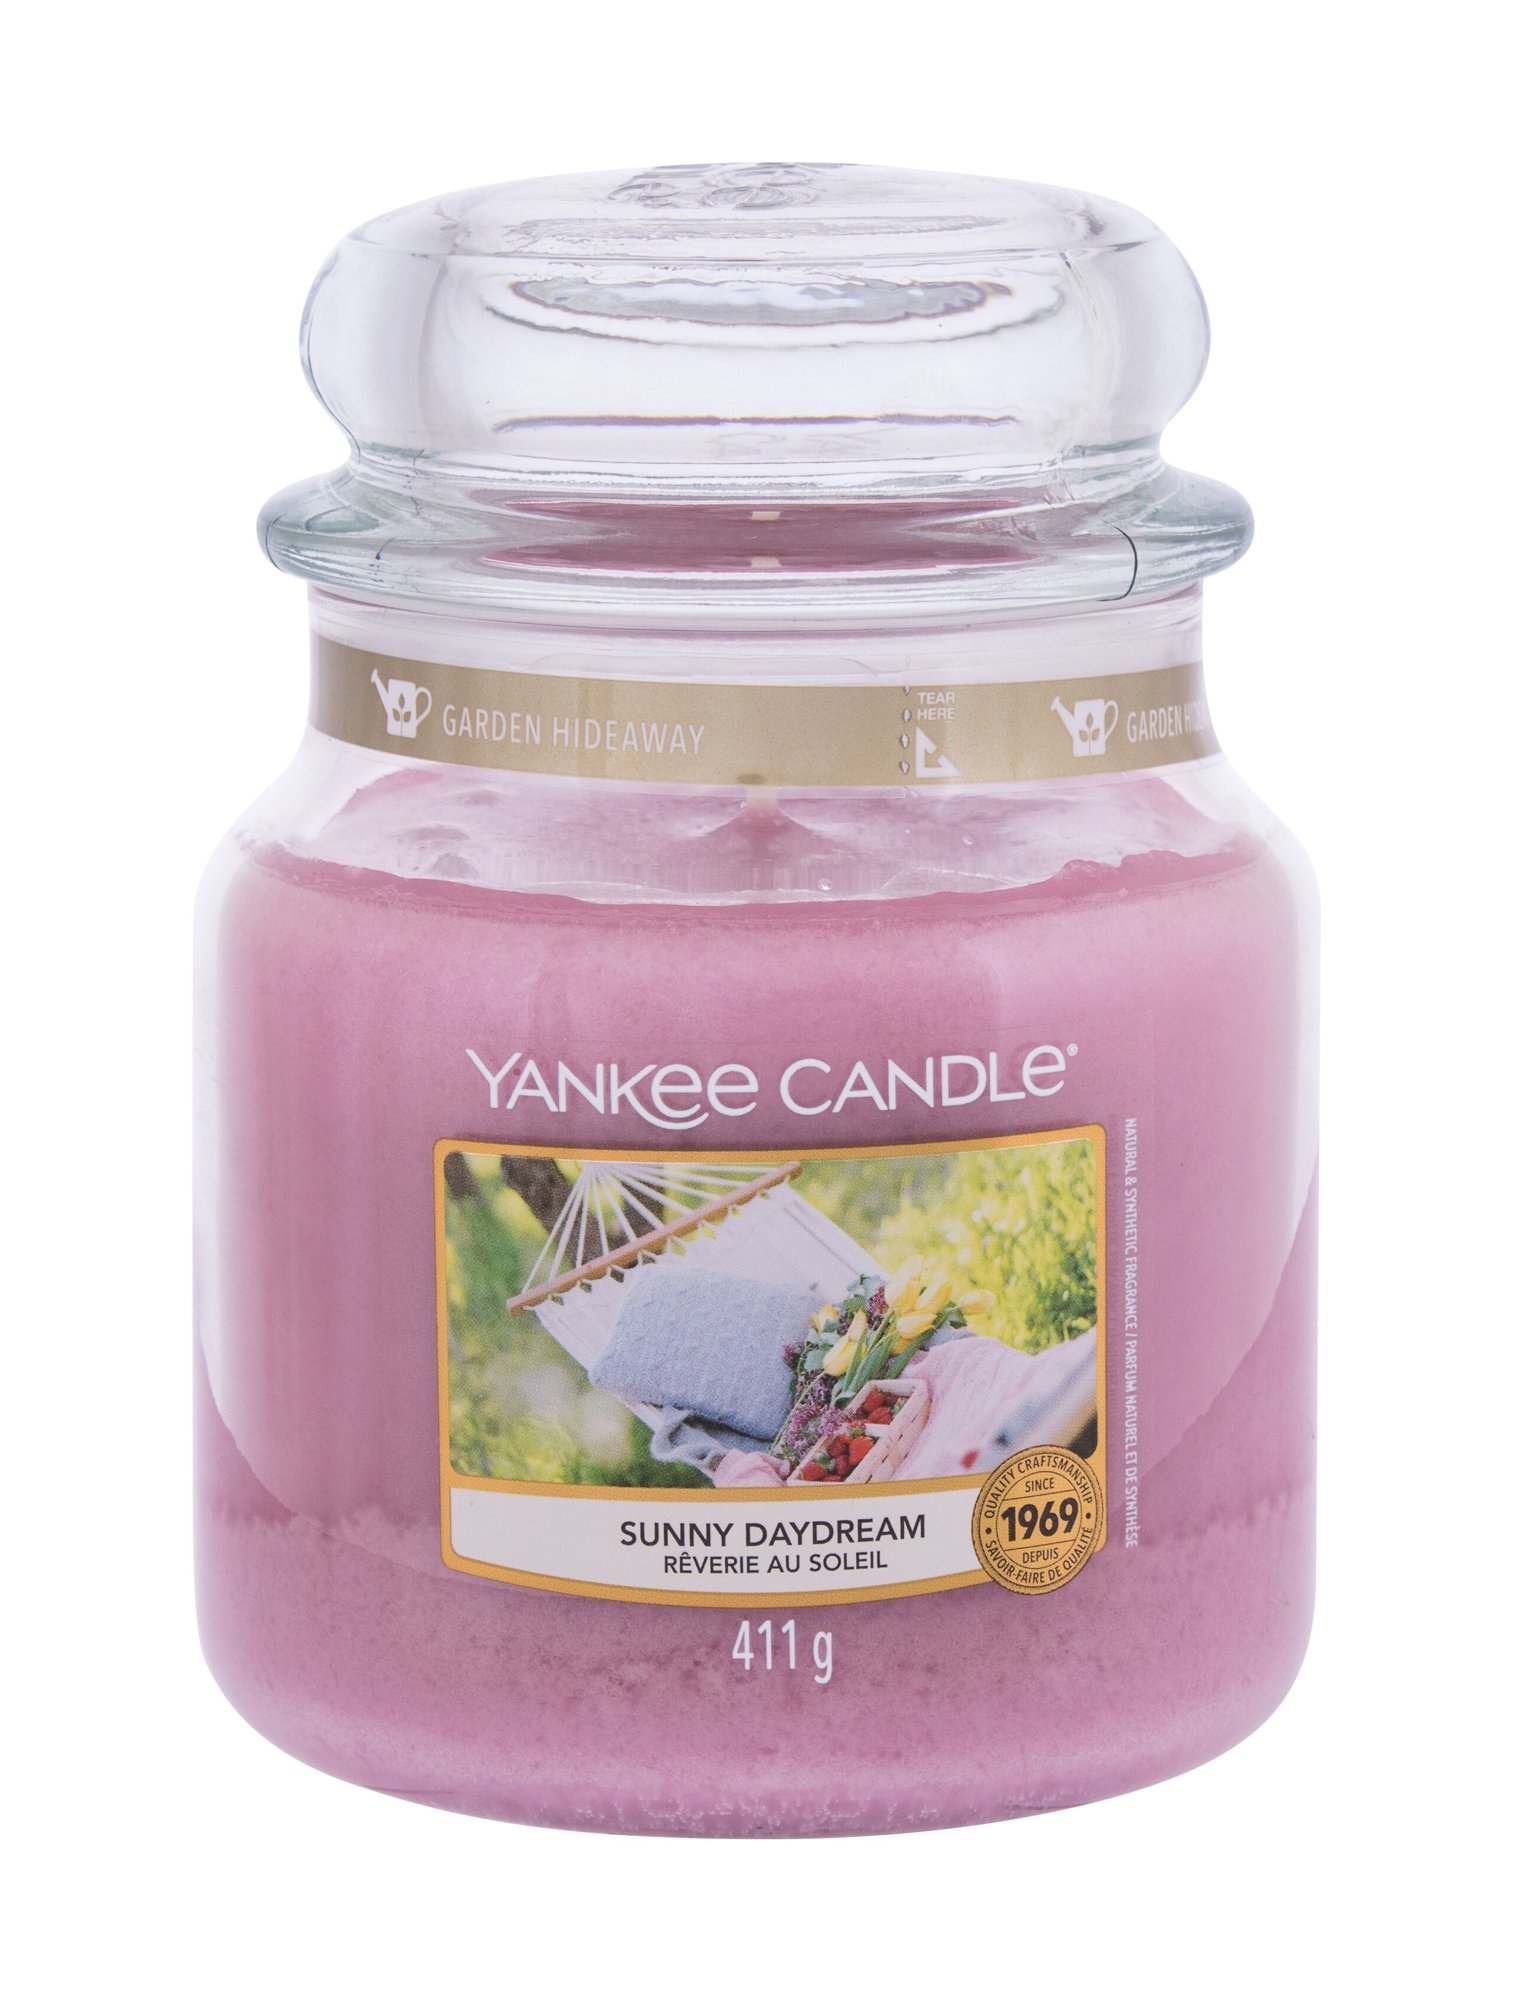 Yankee Candle Sunny Daydream 411g Kvepalai Unisex Scented Candle